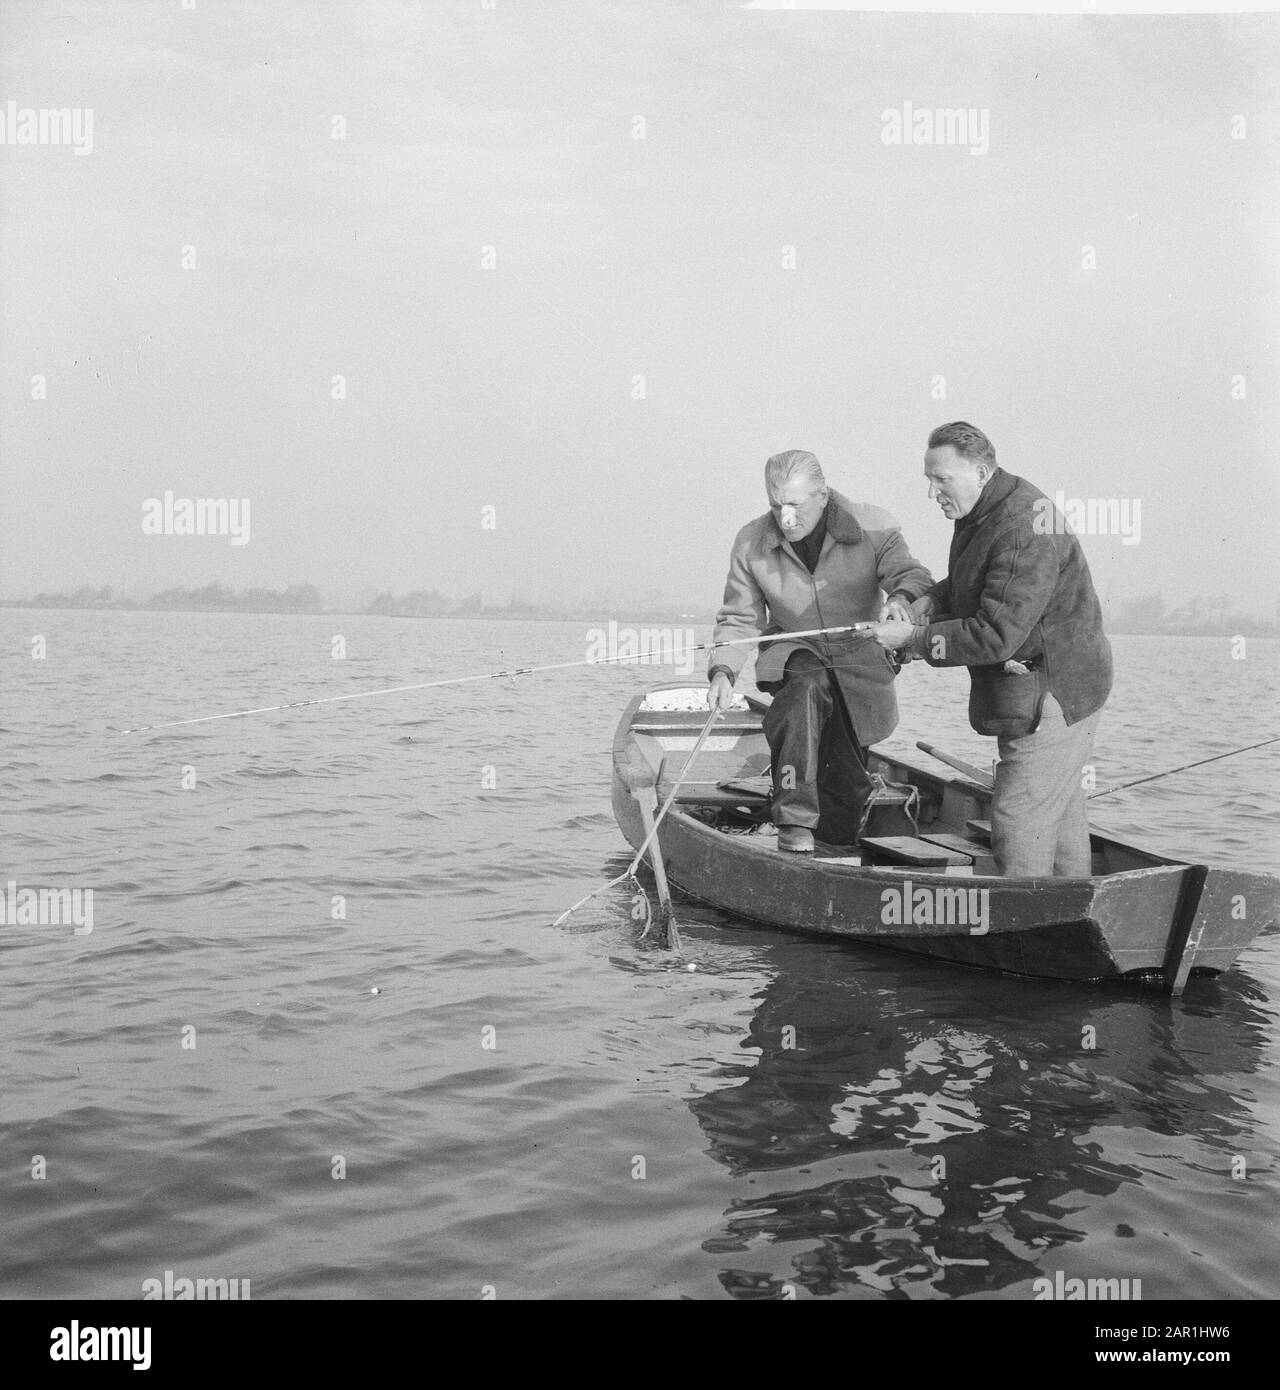 Boat two fishermen Black and White Stock Photos & Images - Page 2